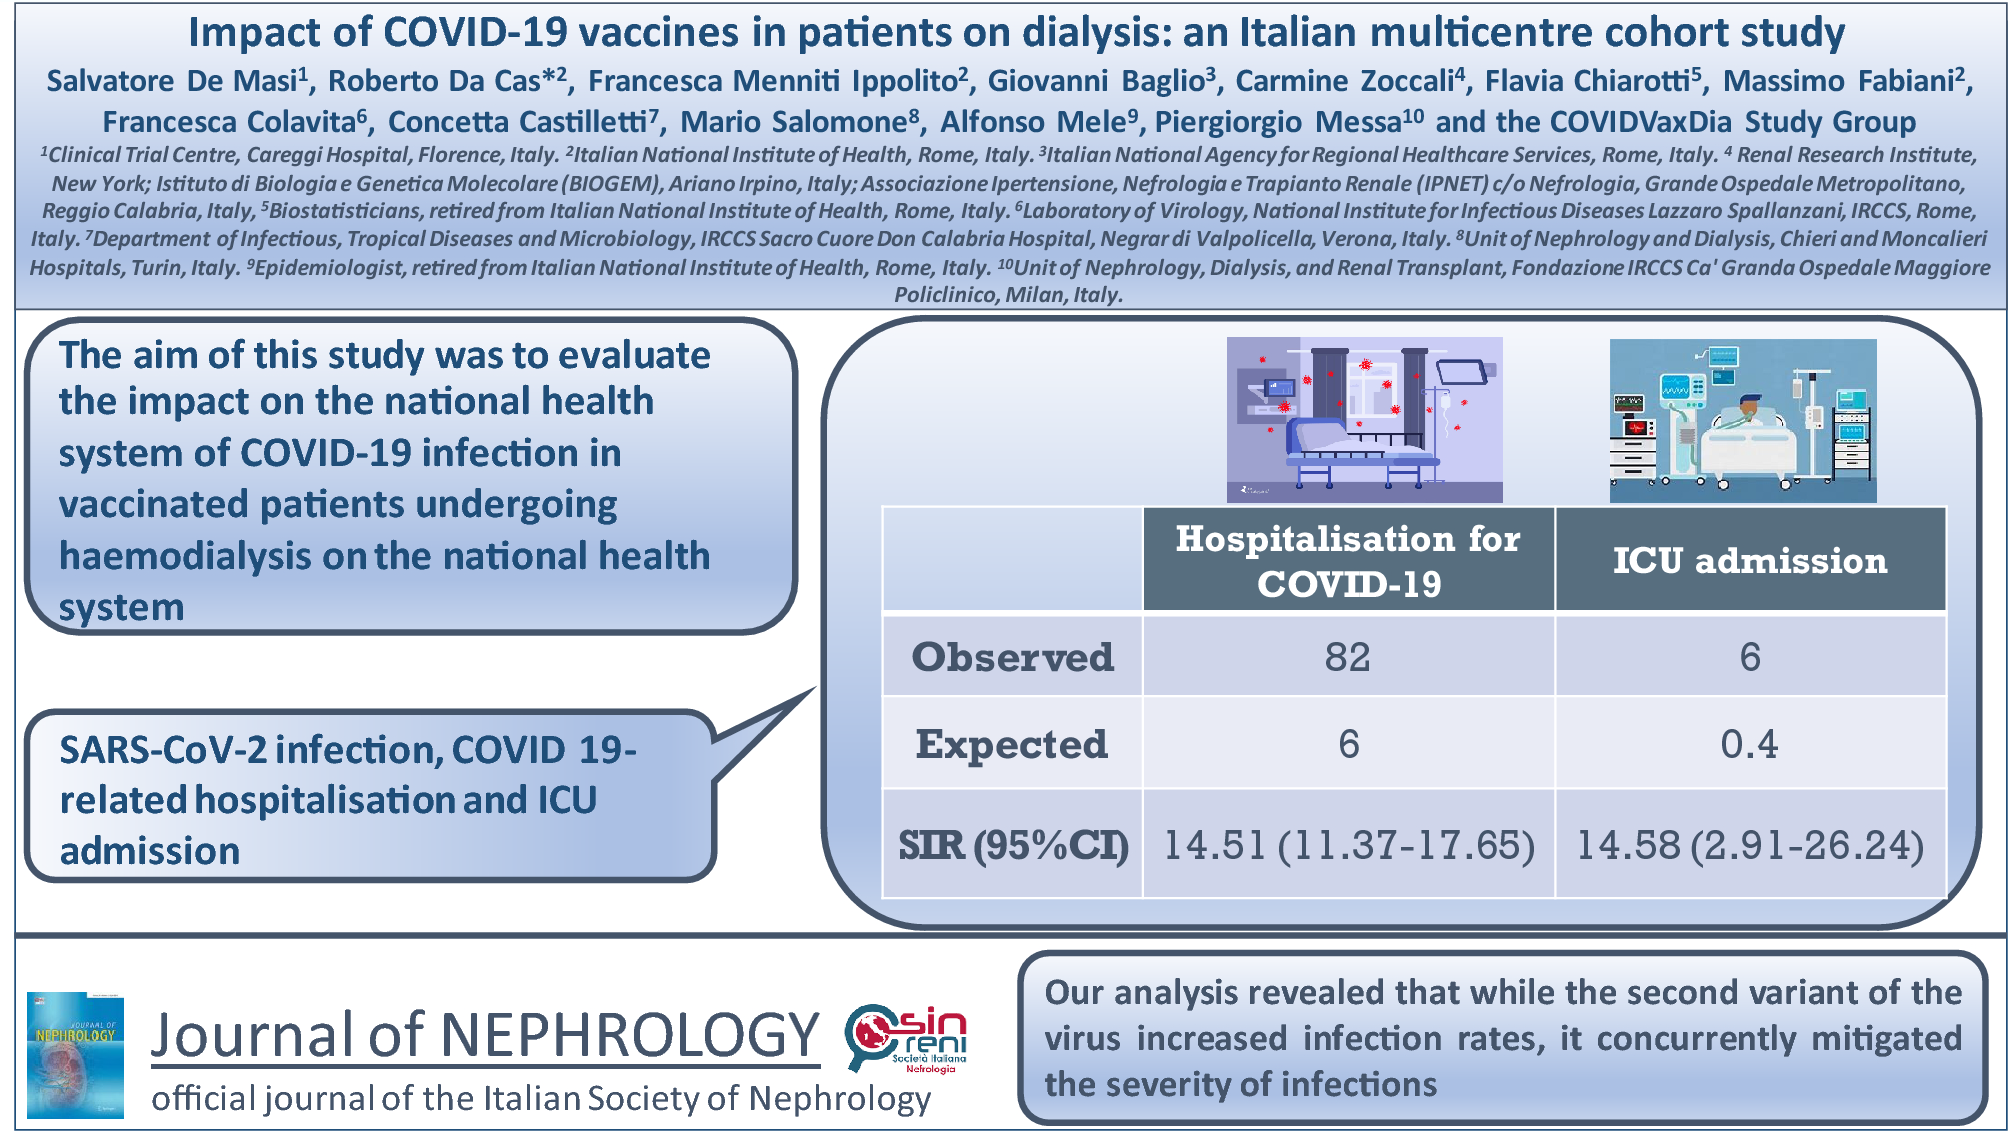 Impact of COVID-19 vaccines in patients on hemodialysis: an Italian multicentre cohort study